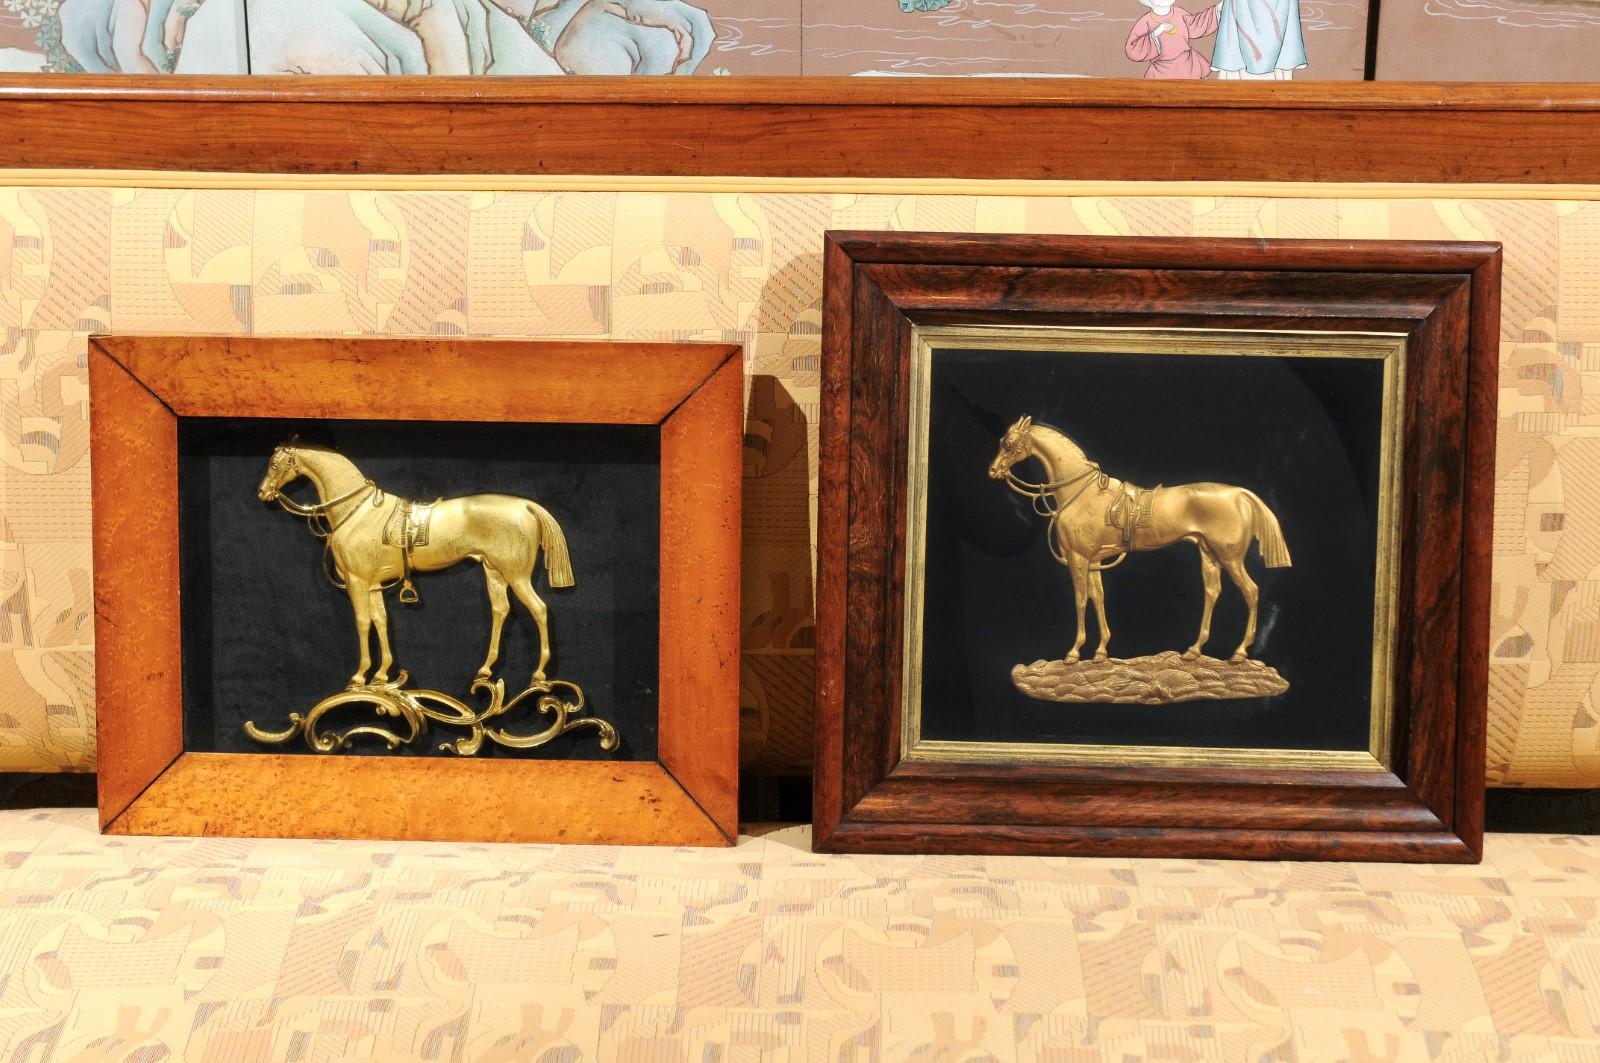 A set of three mid-19th century English gilt bronze horses mounted on black velvet in wooden and gilt frames.